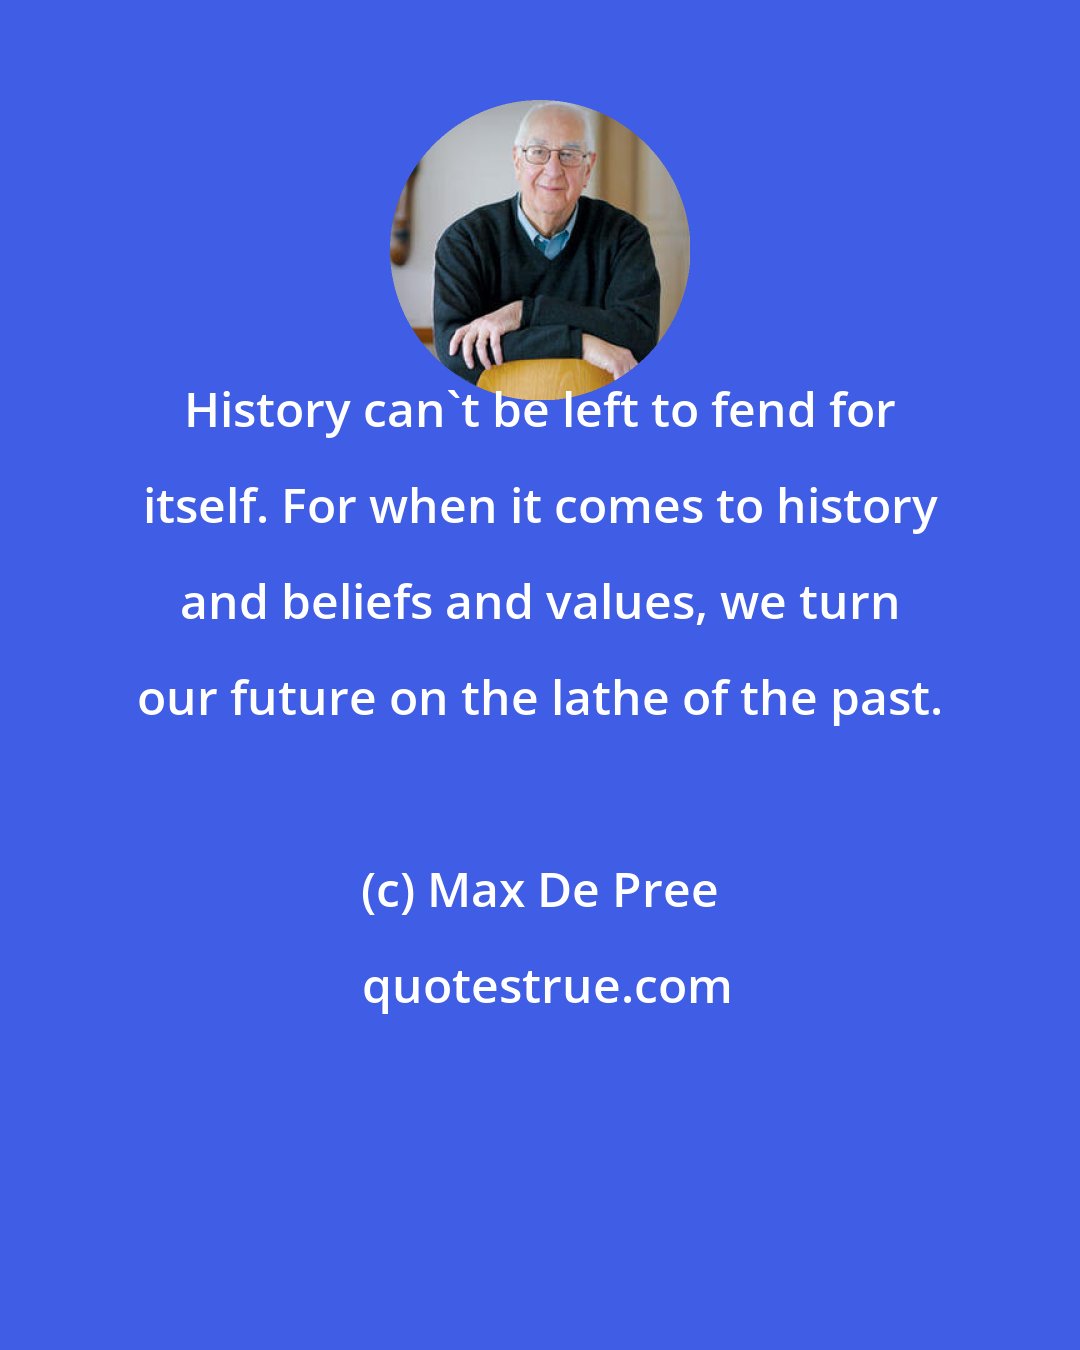 Max De Pree: History can't be left to fend for itself. For when it comes to history and beliefs and values, we turn our future on the lathe of the past.